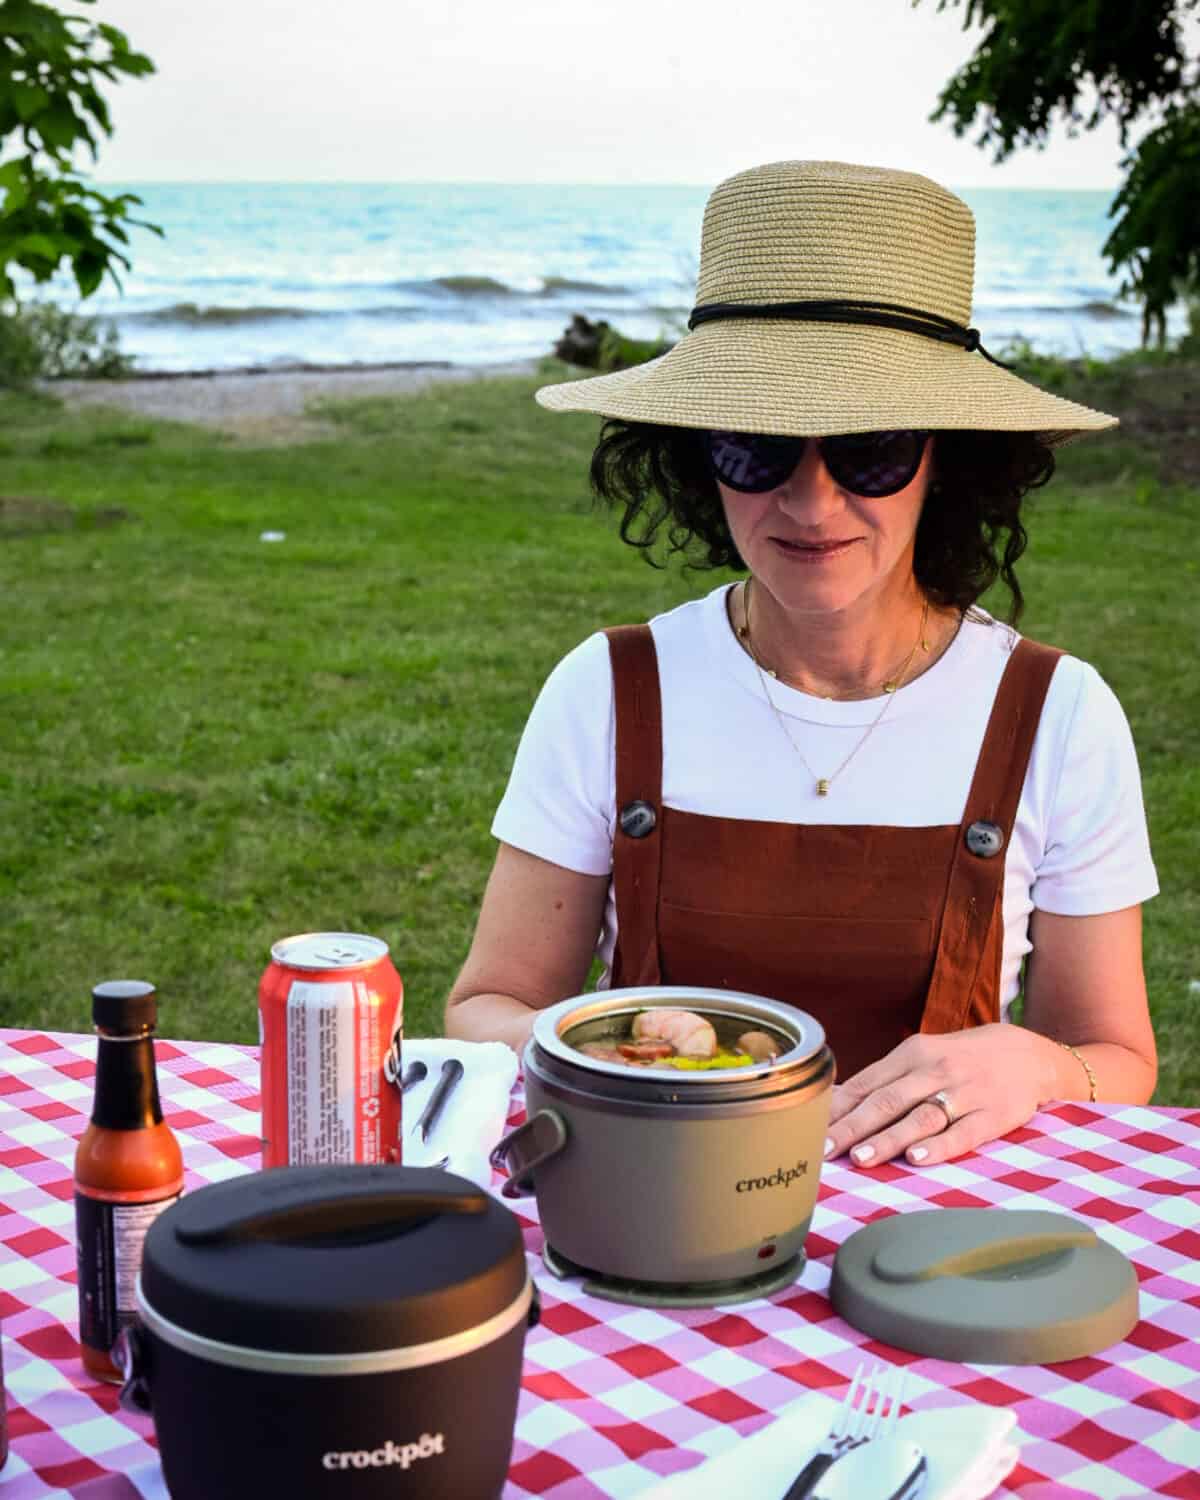 A woman wearing a straw hat sitting at picnic table with a red and white checkered tablecloth about to eat from her lunch crock pot.